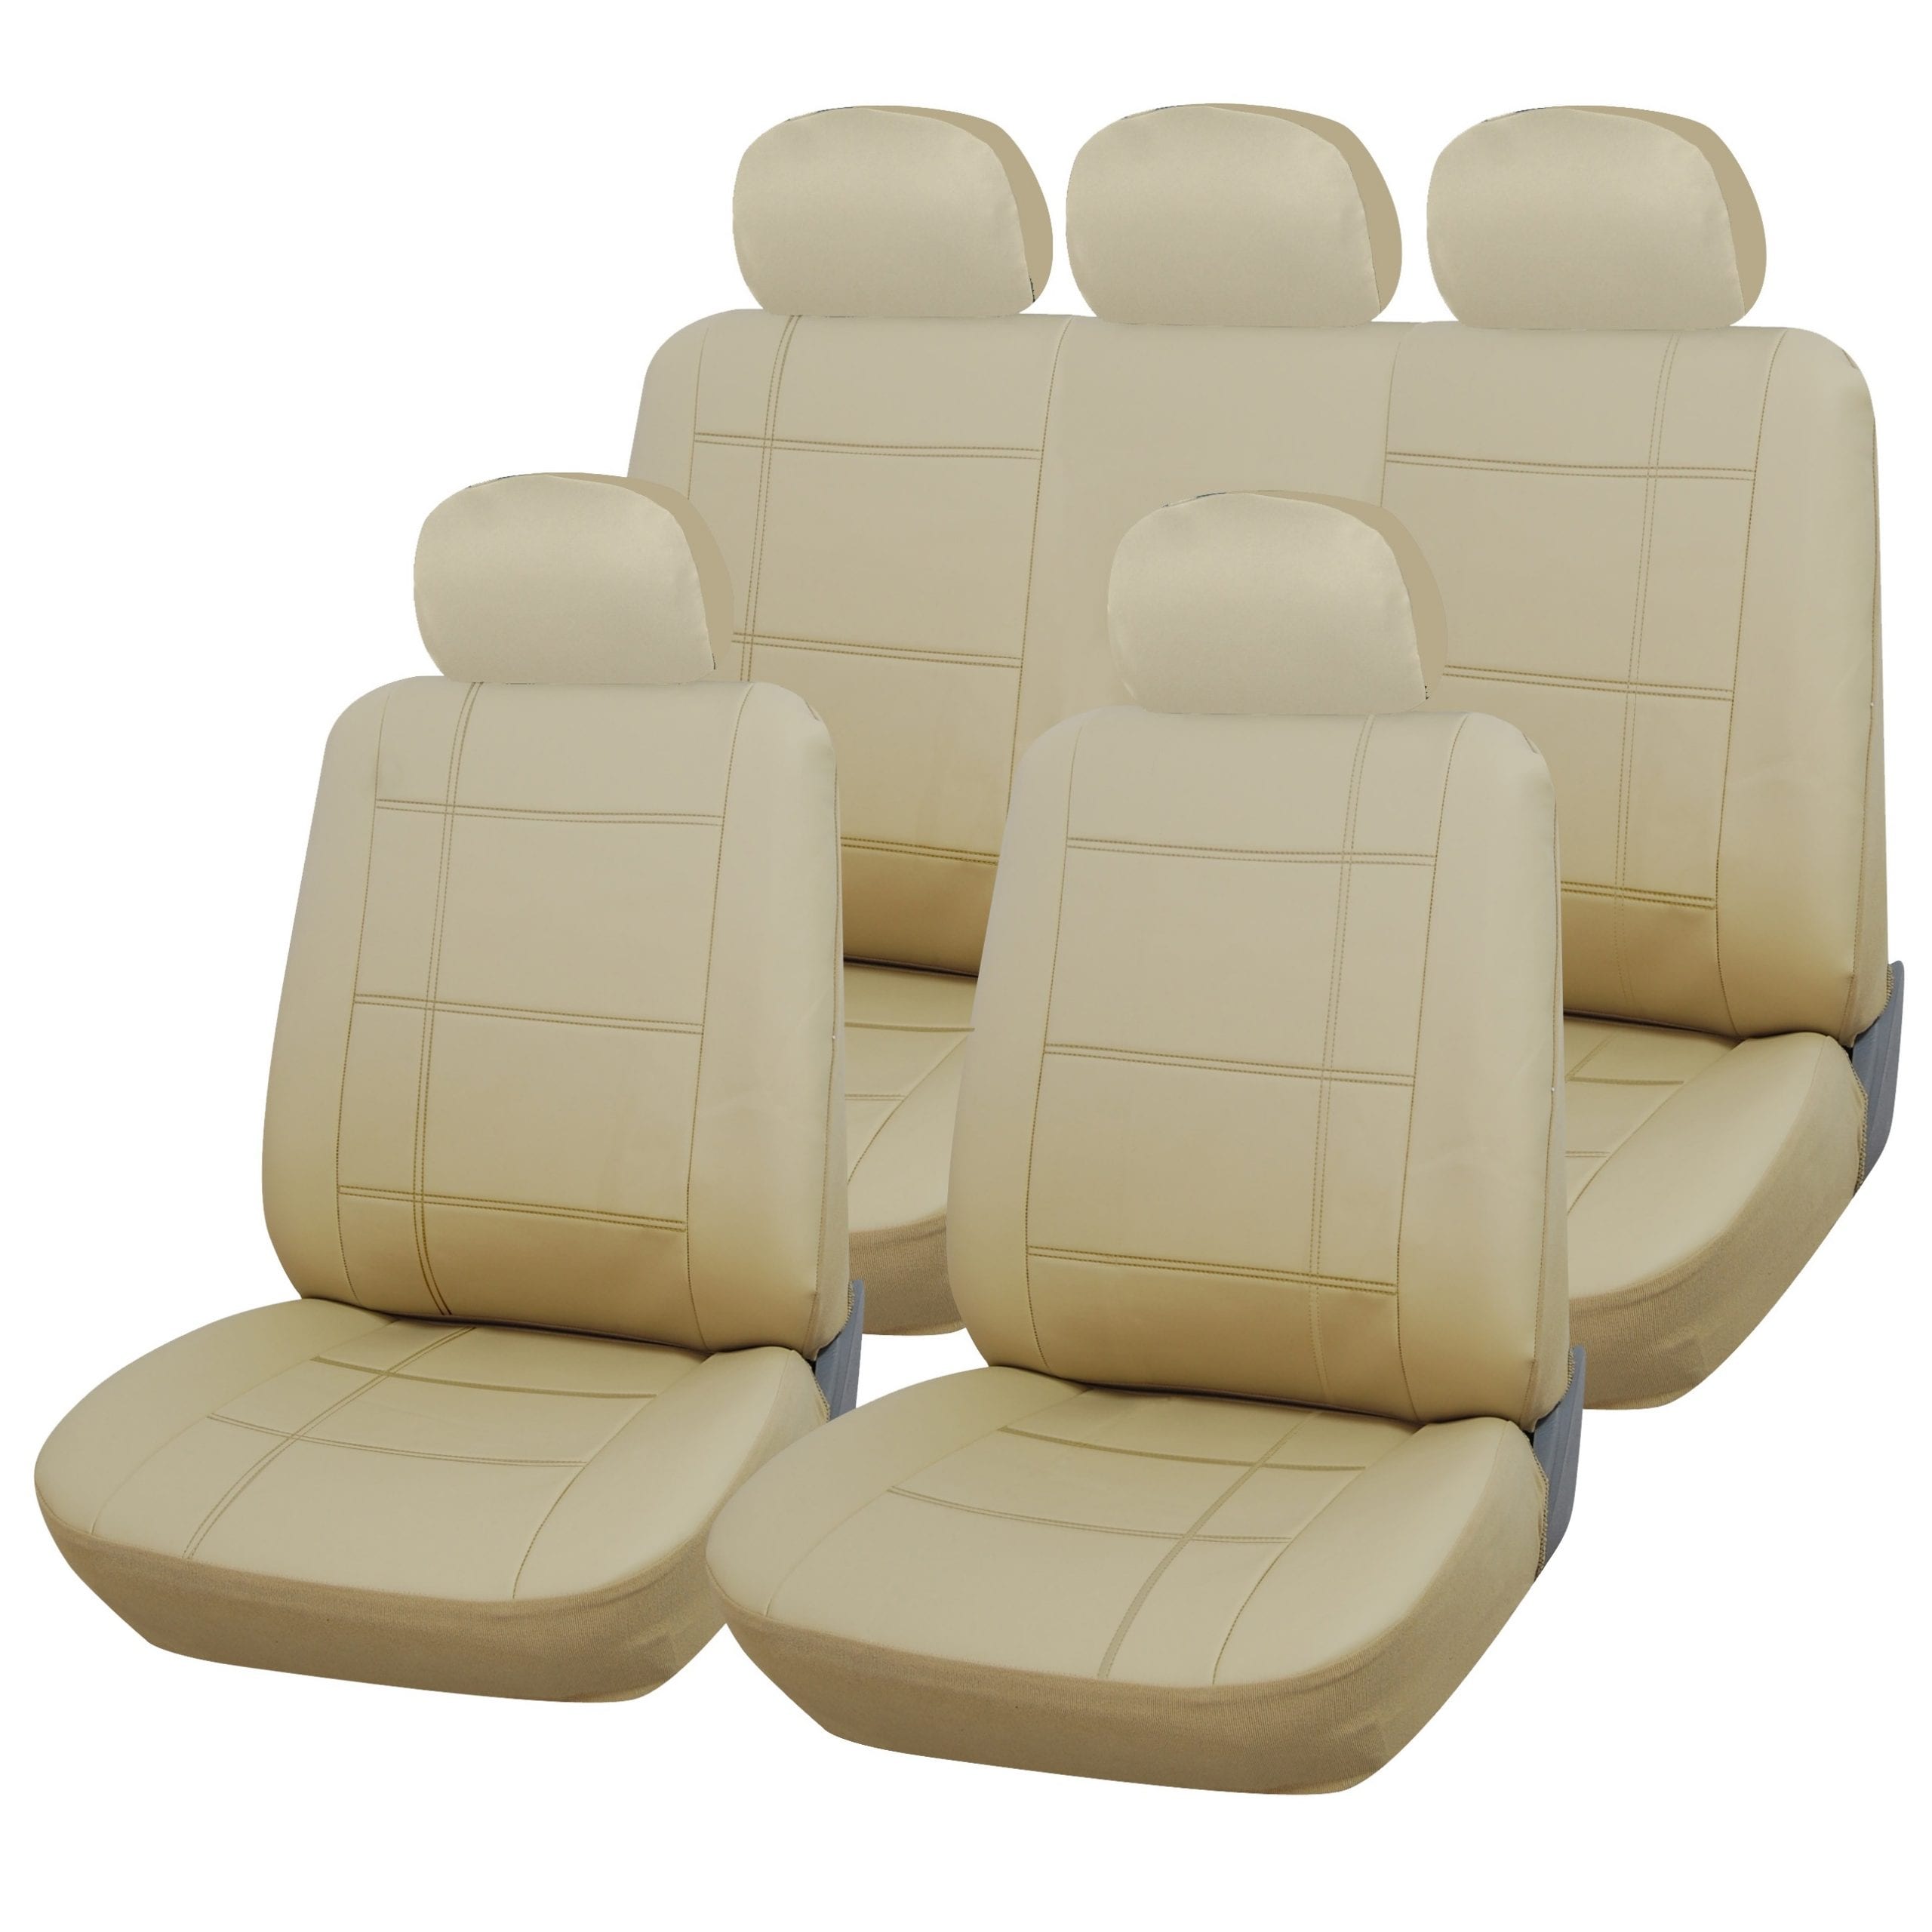 HEAVY DUTY UK MADE LEATHER LOOK CAR SEAT COVERS FULL SET 